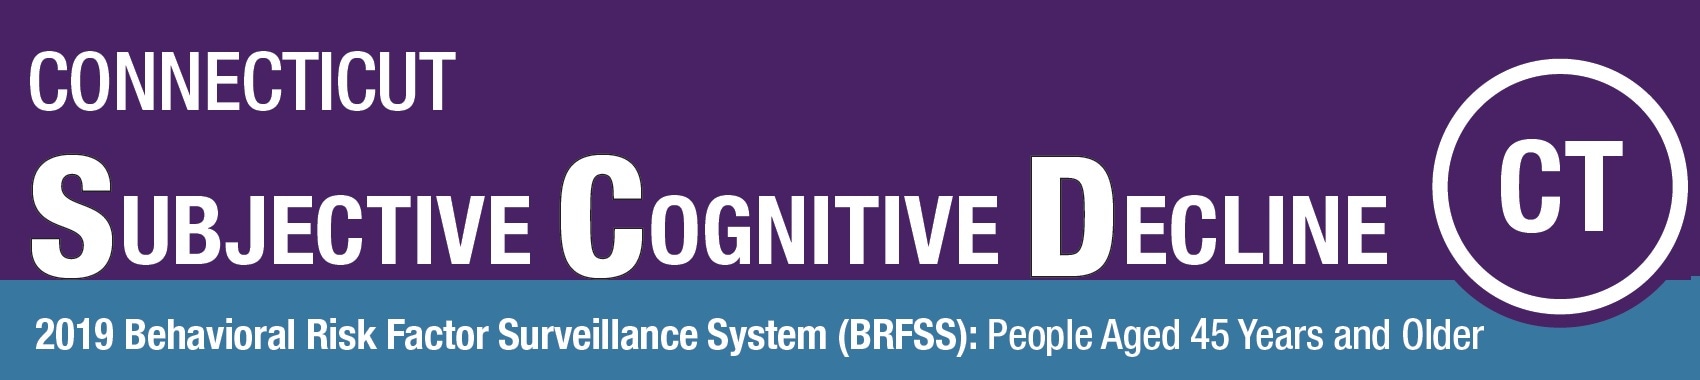 Connecticut SCD 2019 Behavioral Risk Factor Surveillance System (BRFSS): People Aged 45 Years and Older